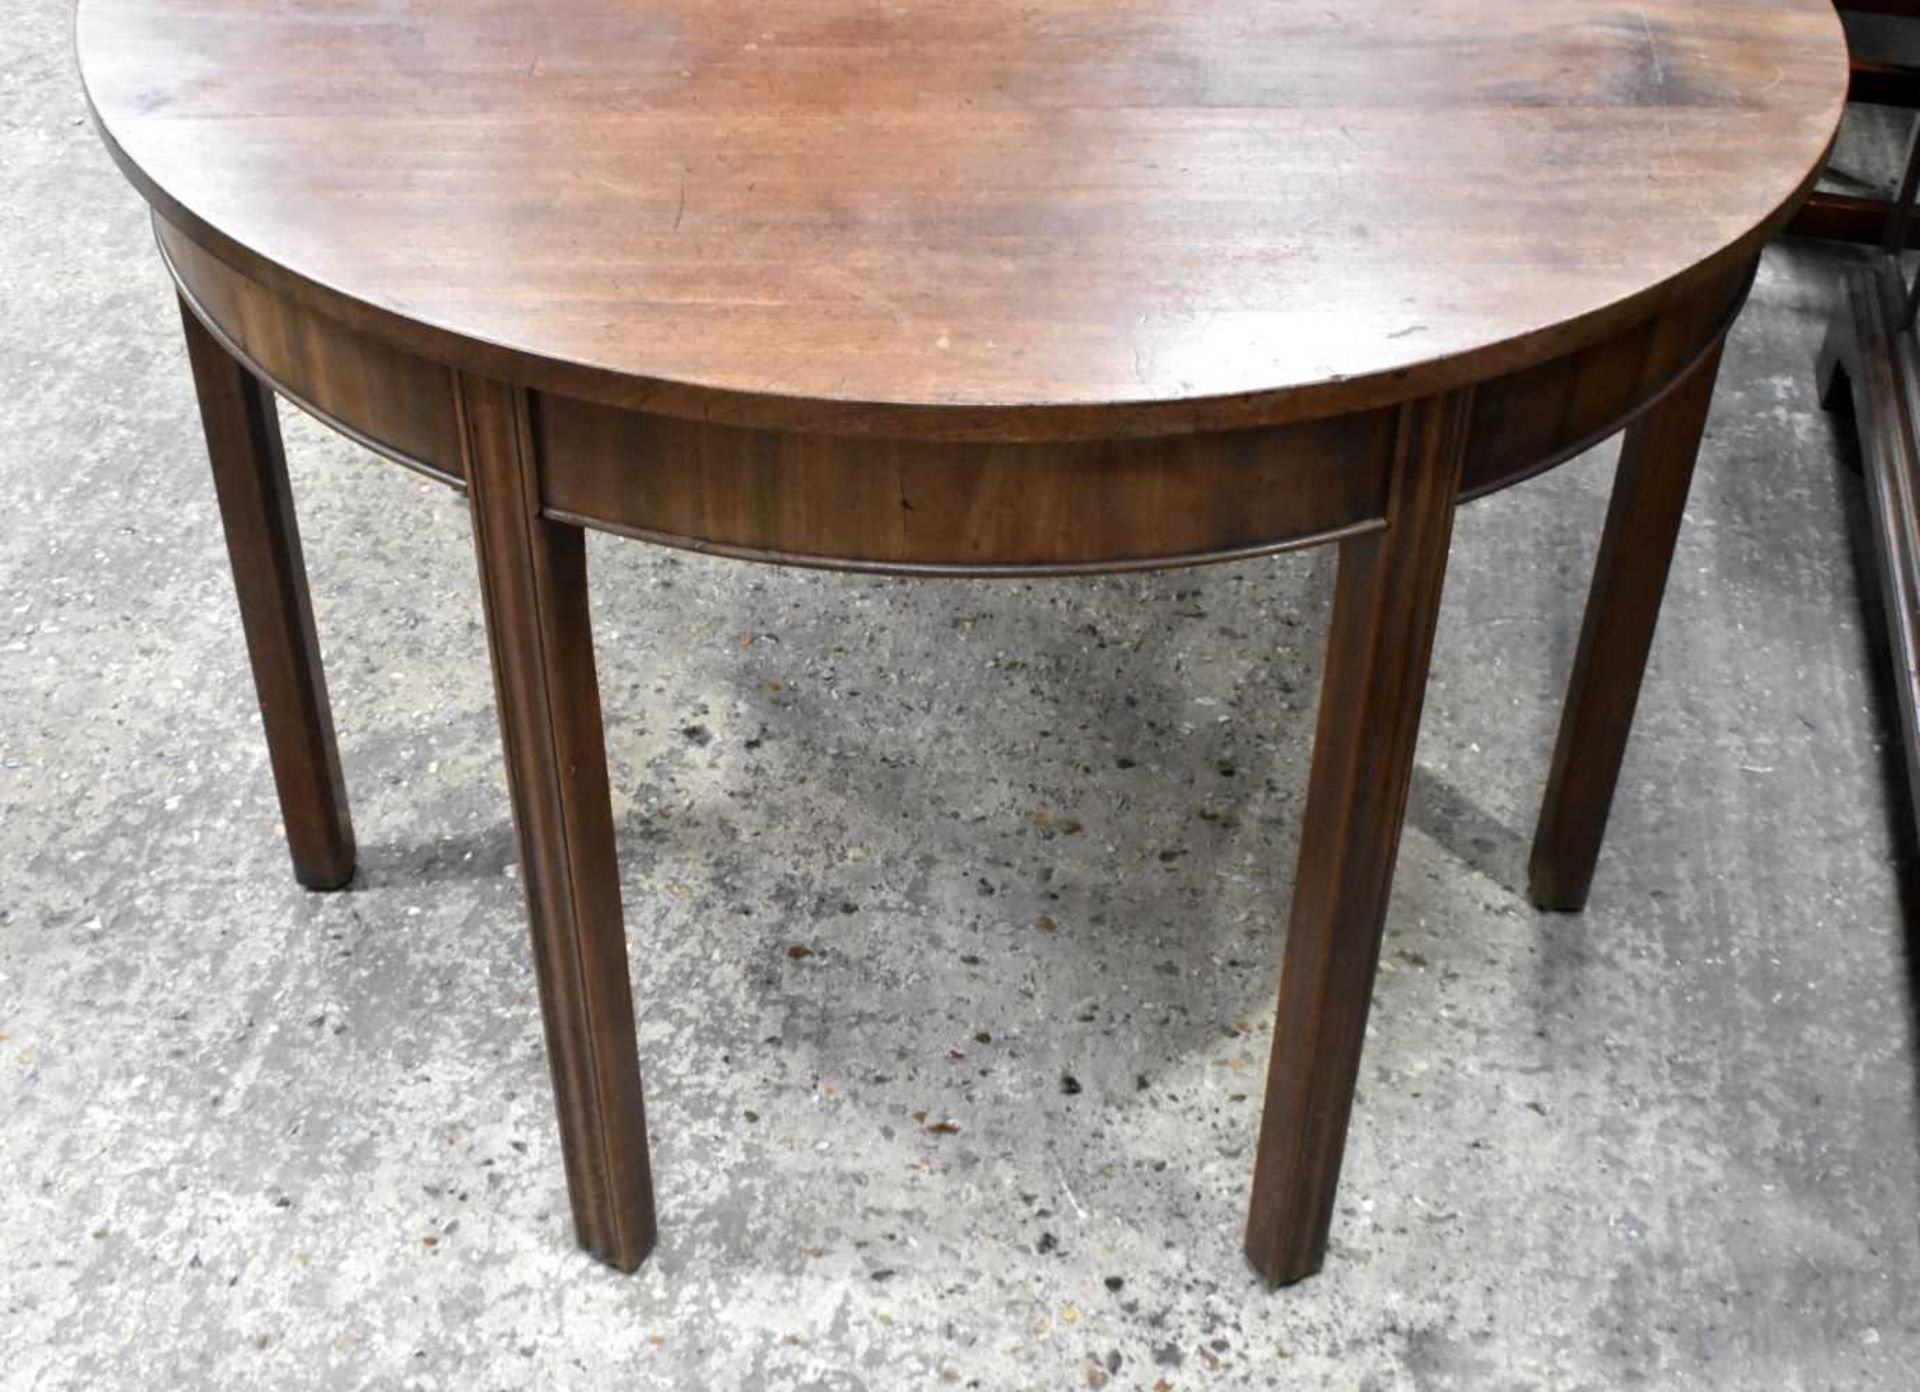 A Mahogany Dining table comprising of a central drop leaf table and two Demilune shaped extensions - Image 7 of 9